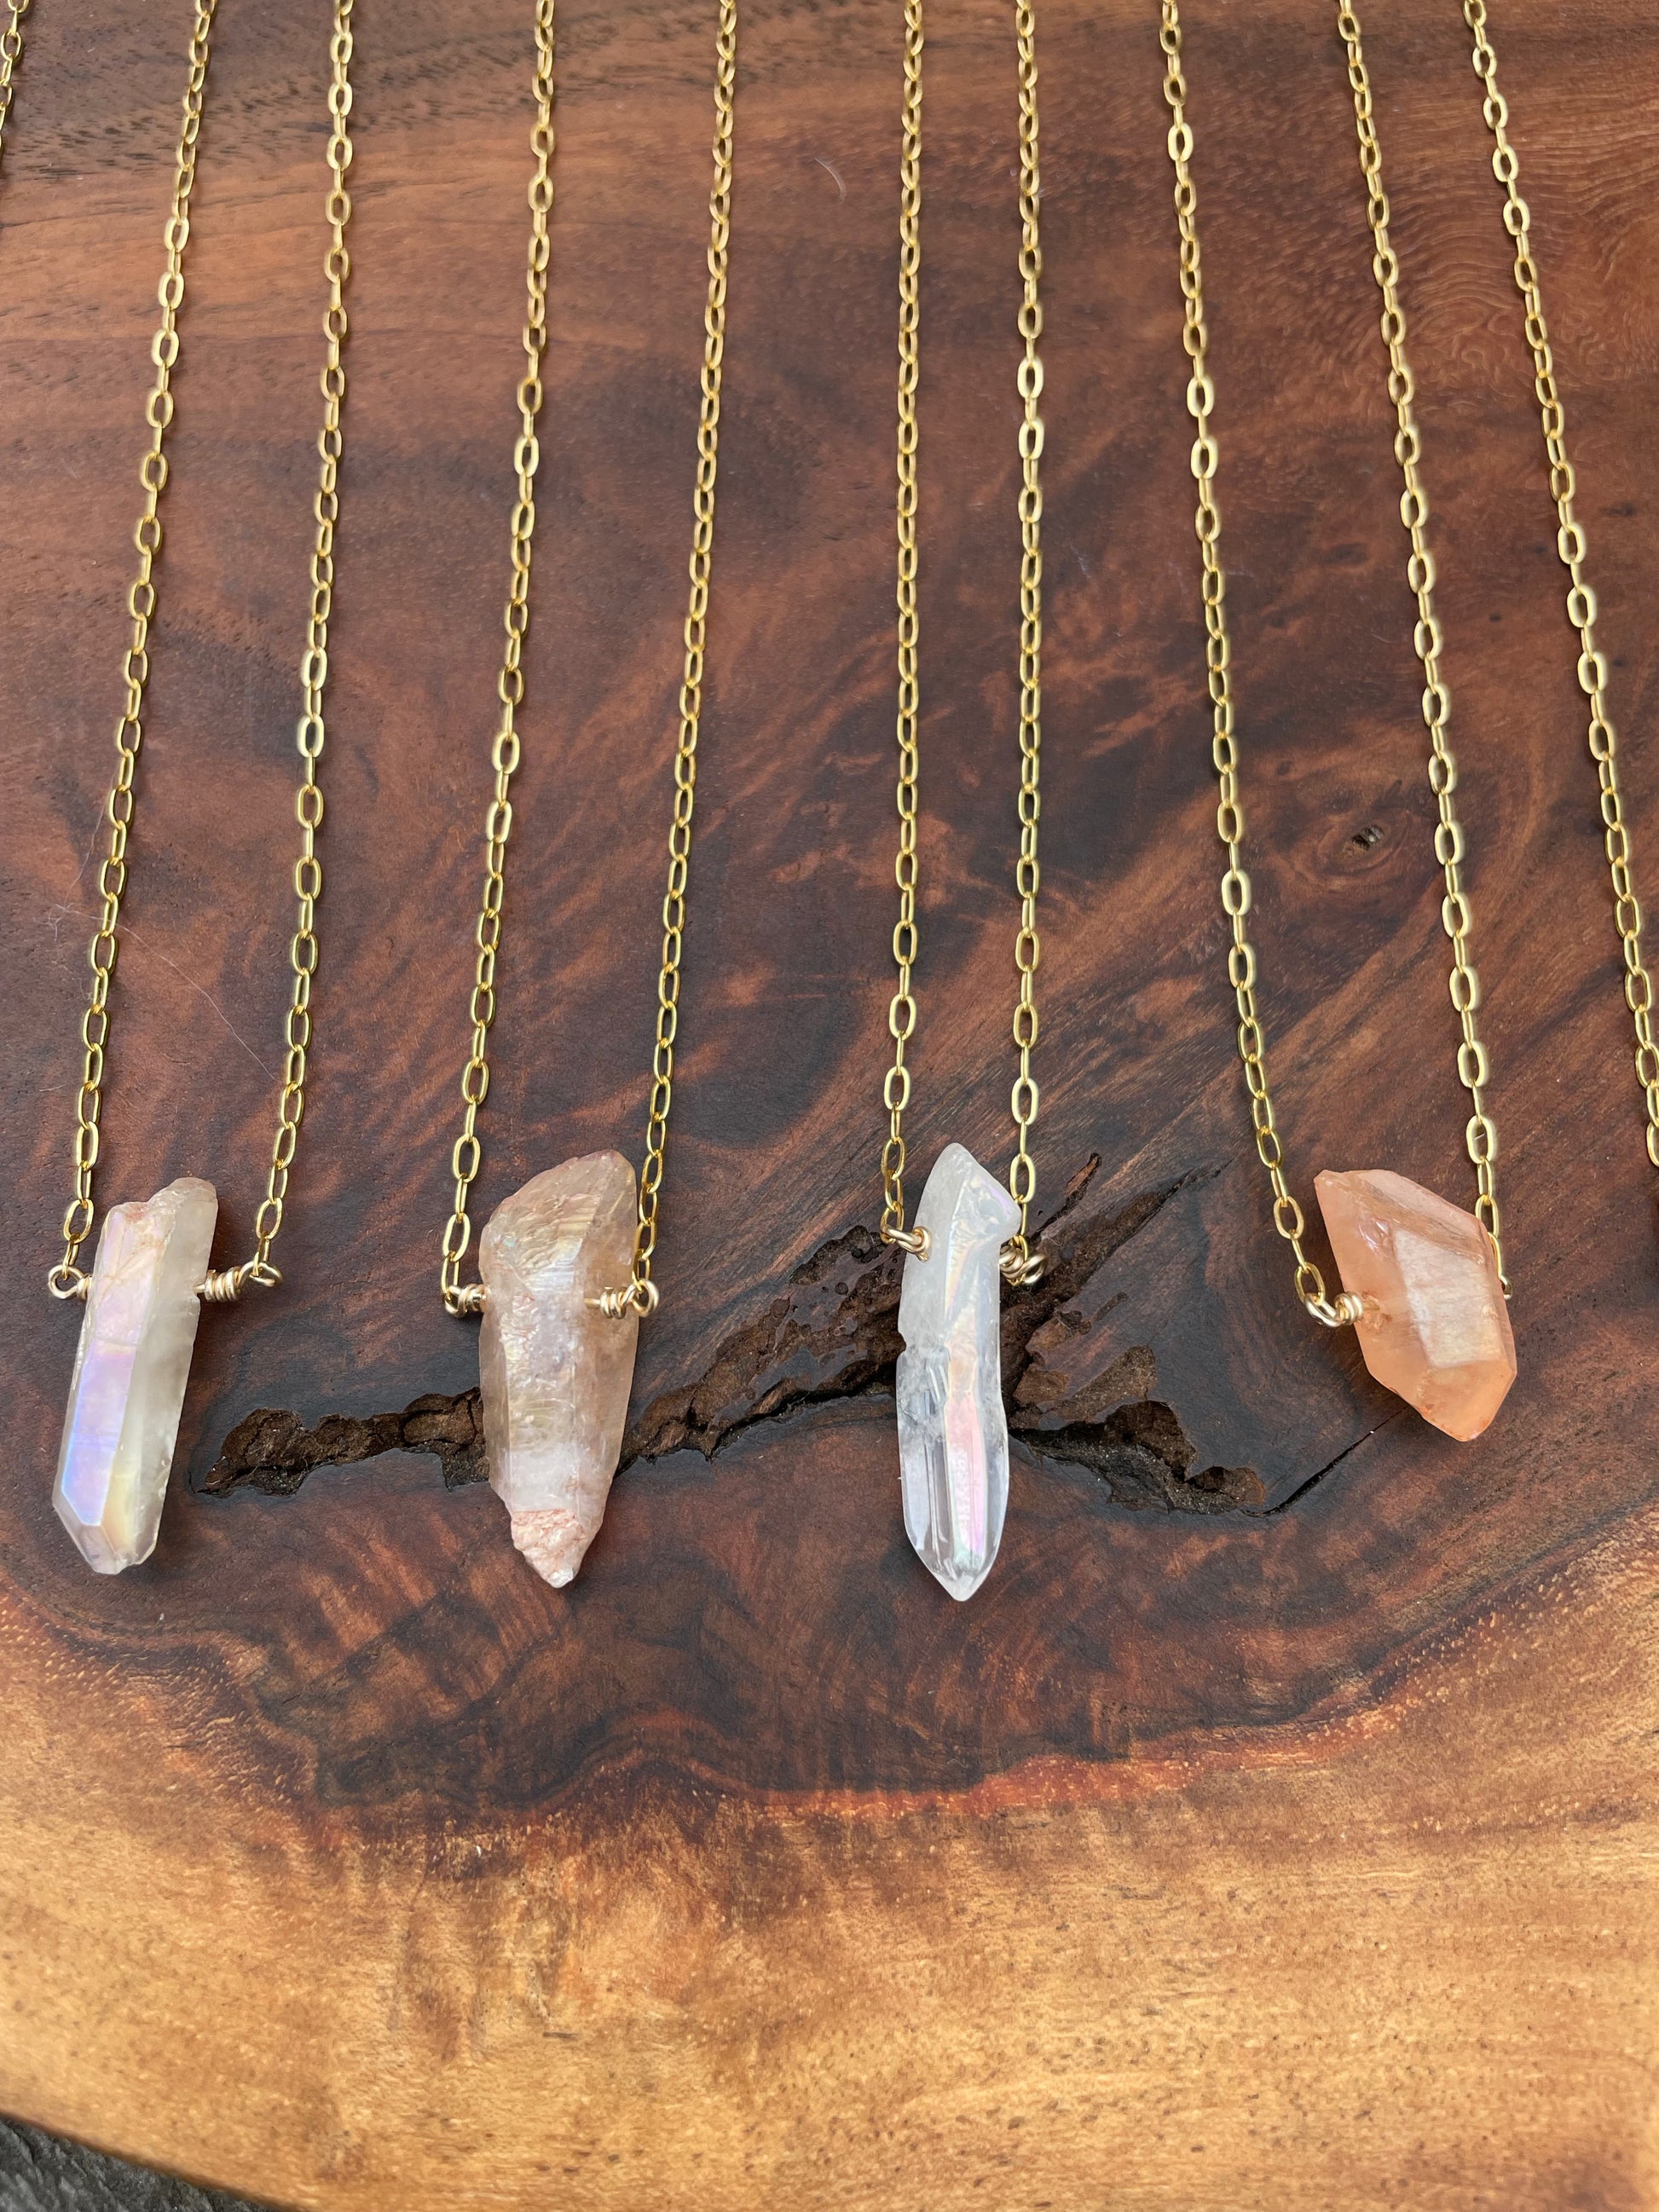 Four rough crystal necklaces in a row on a wooden background. white, pinky and orange in color.